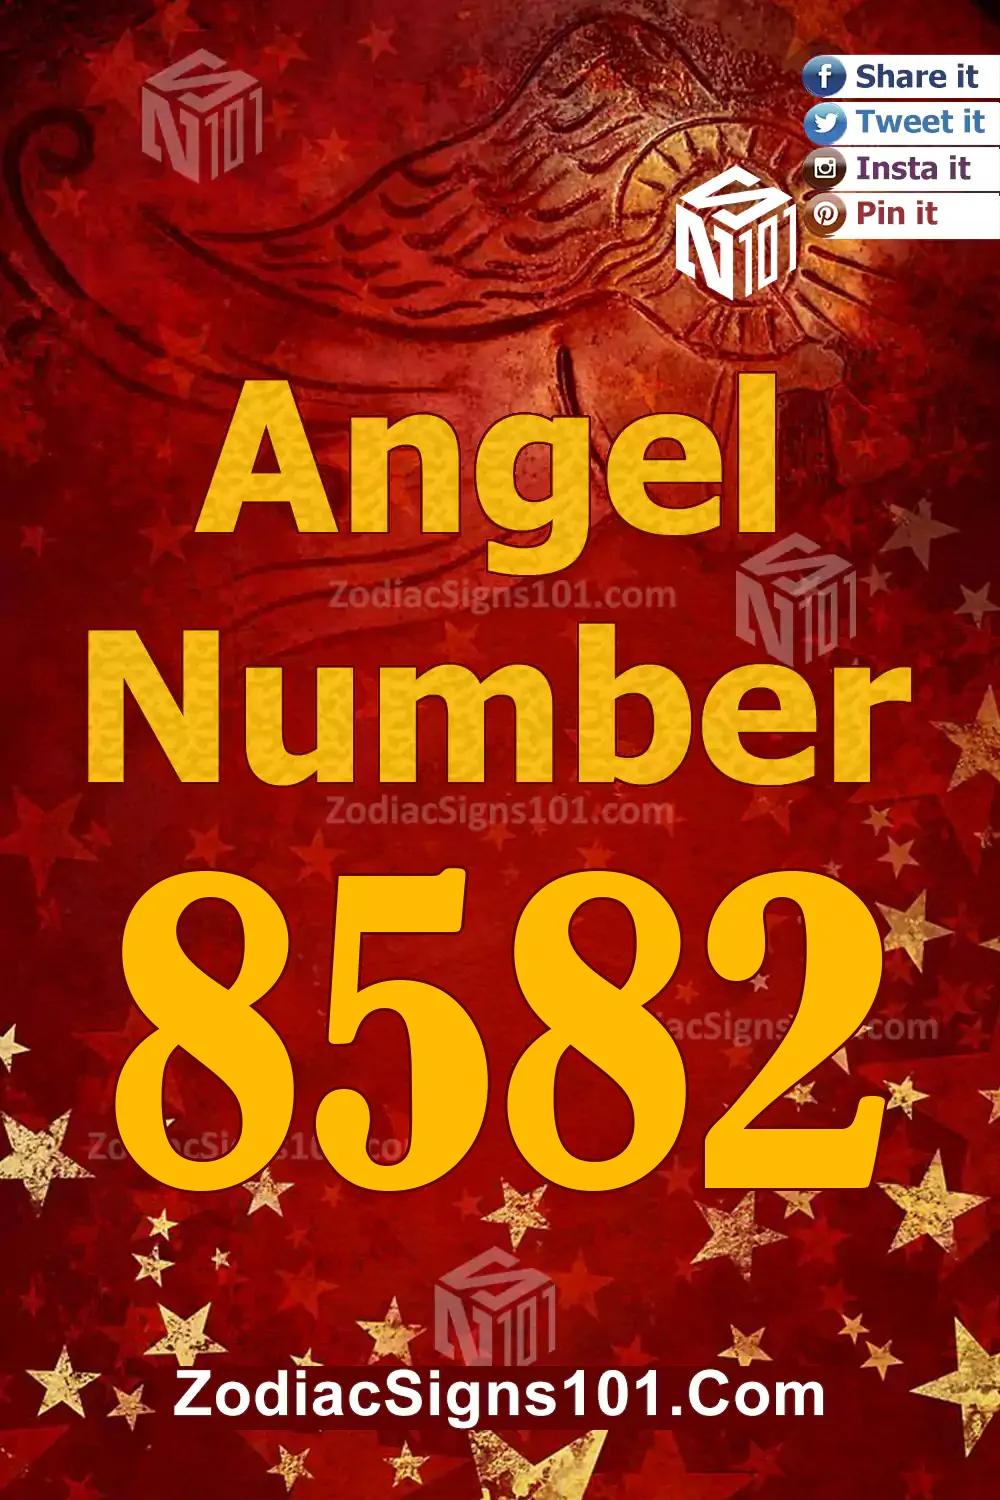 8582 Angel Number Meaning